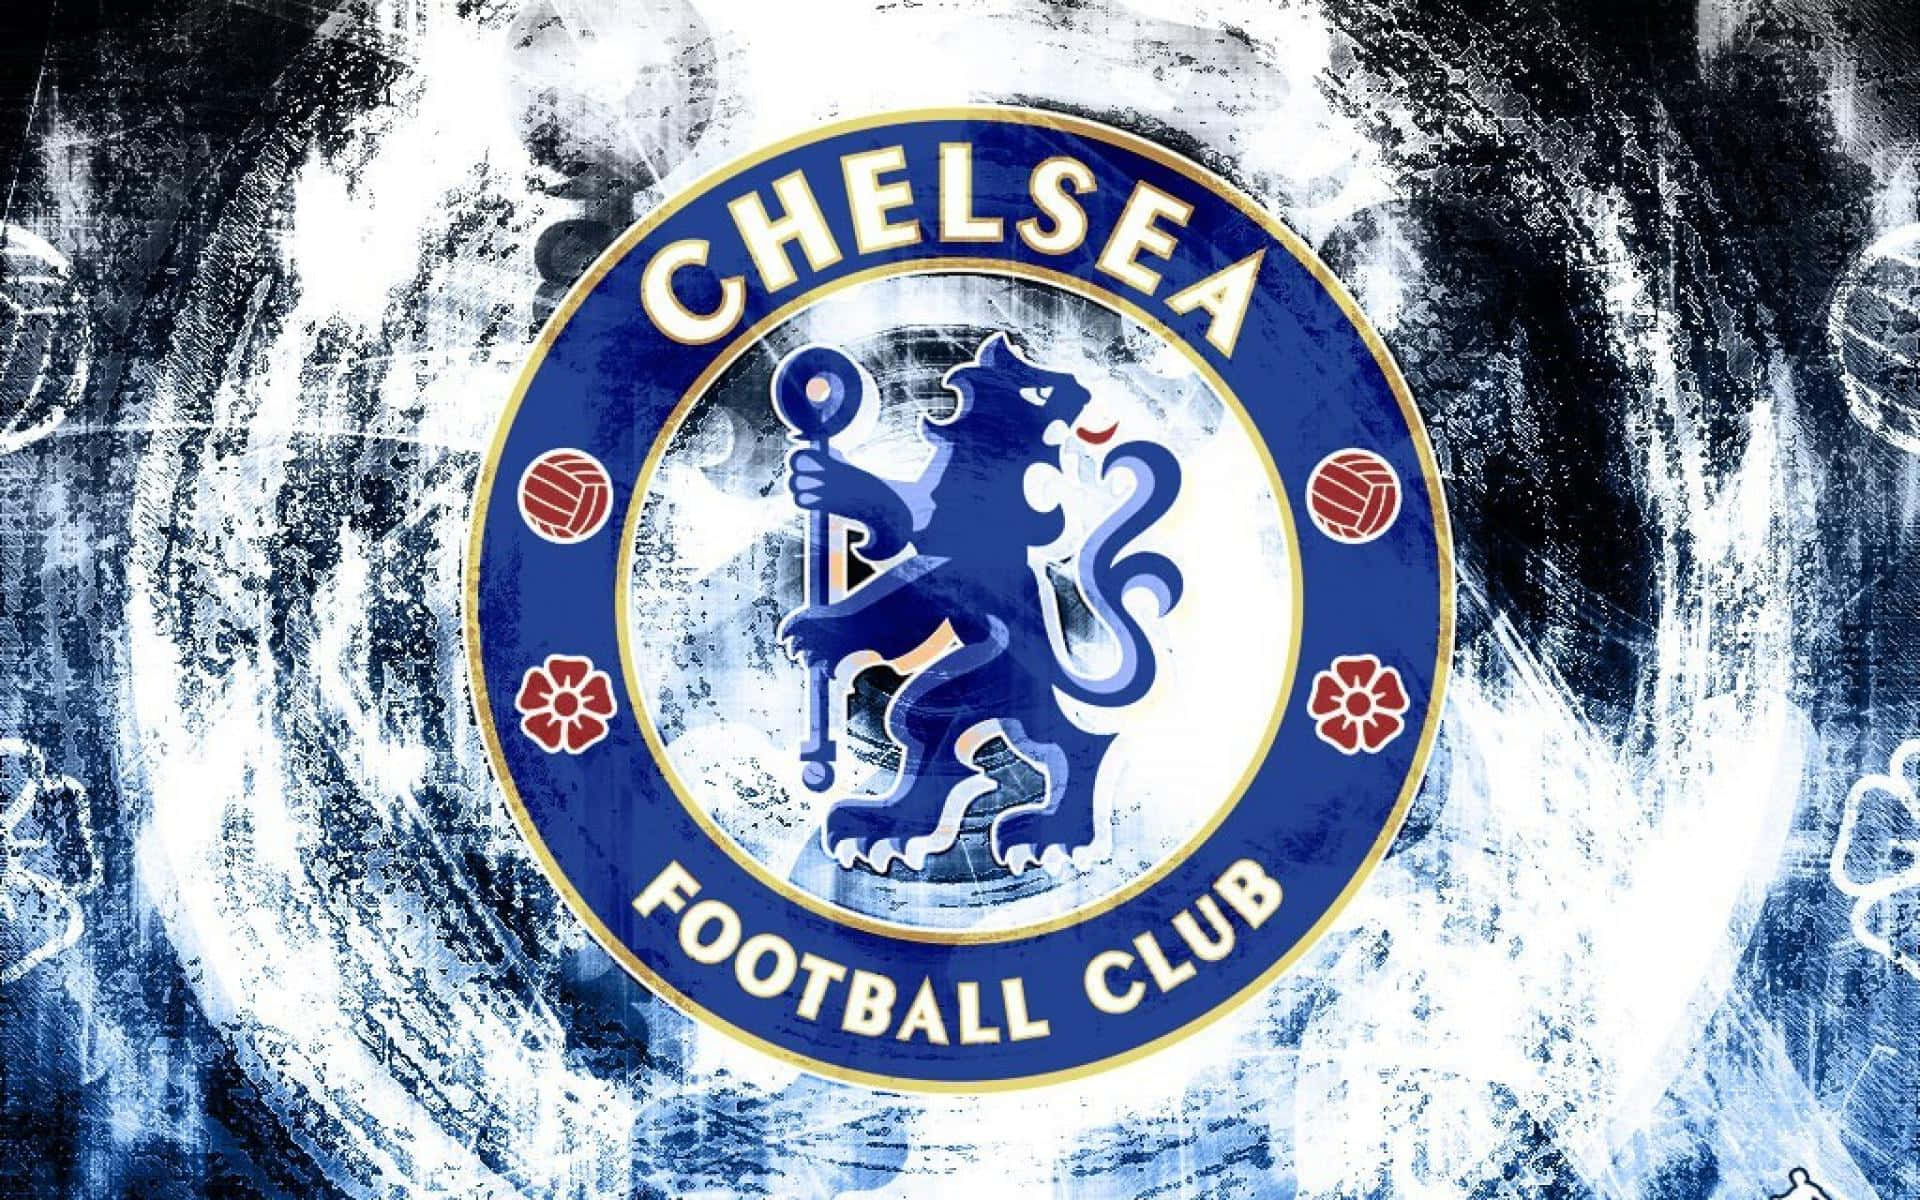 Cheer On The Blues at Chelsea FC